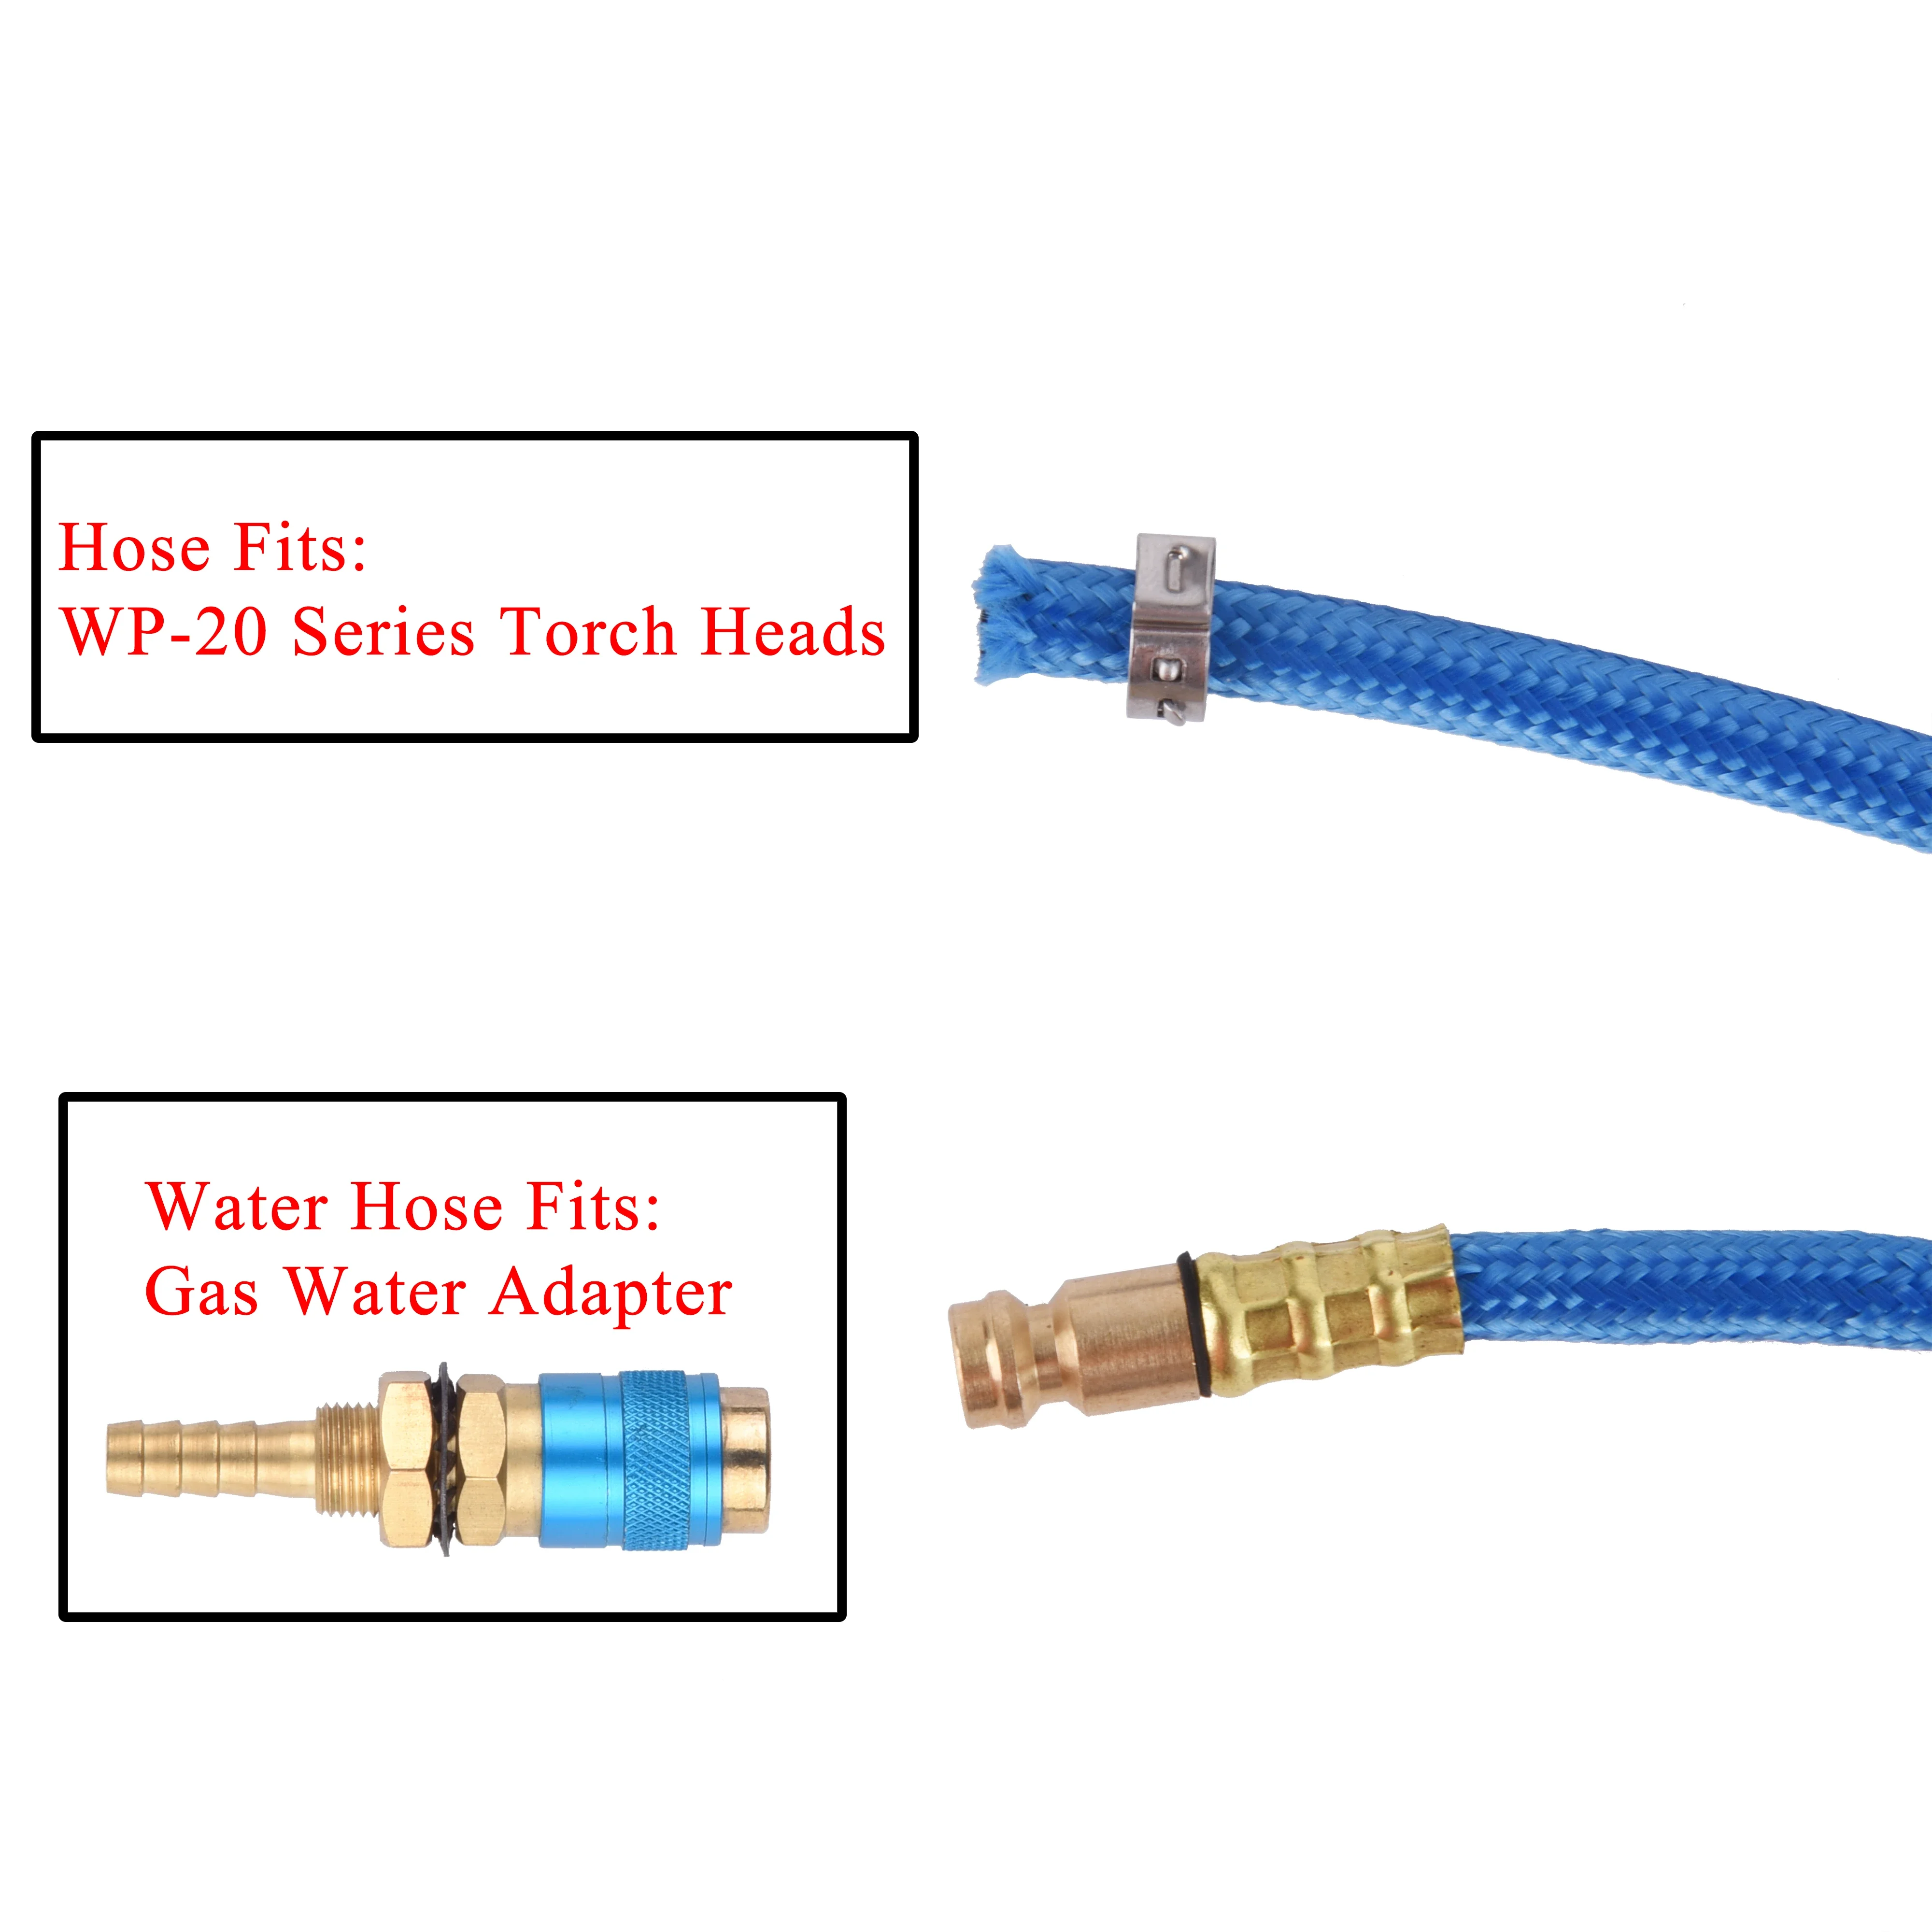 3.8m(12.5ft)/7.6m(25ft) TIG Torch Water-Cooled Hose for WP 20 Series w/Quick Gas Water Adapter